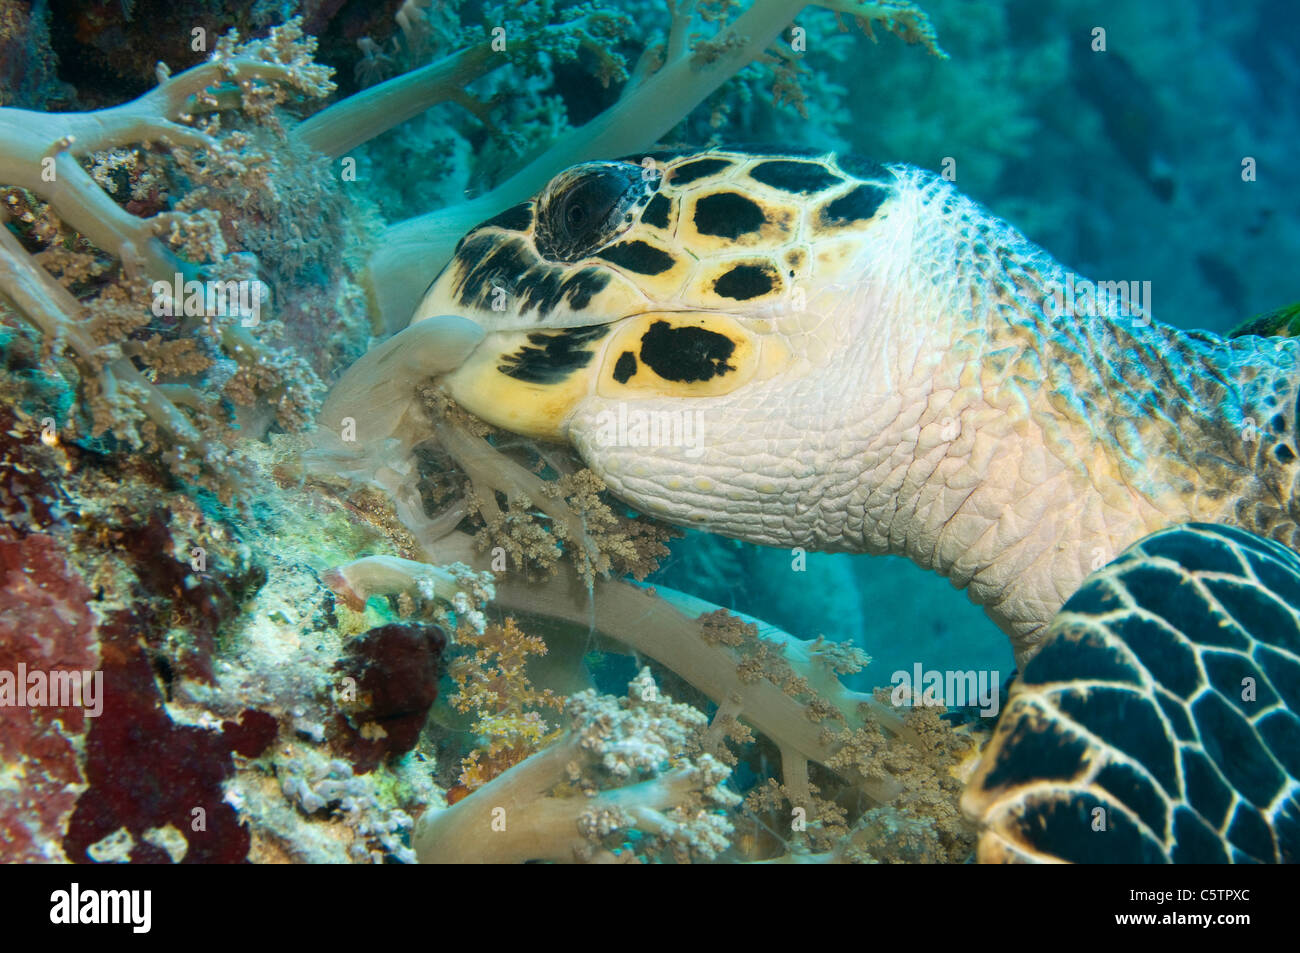 Egypt, Red Sea, Hawksbill turtle (Eretmochelys imbricata) eating soft corals, close-up Stock Photo